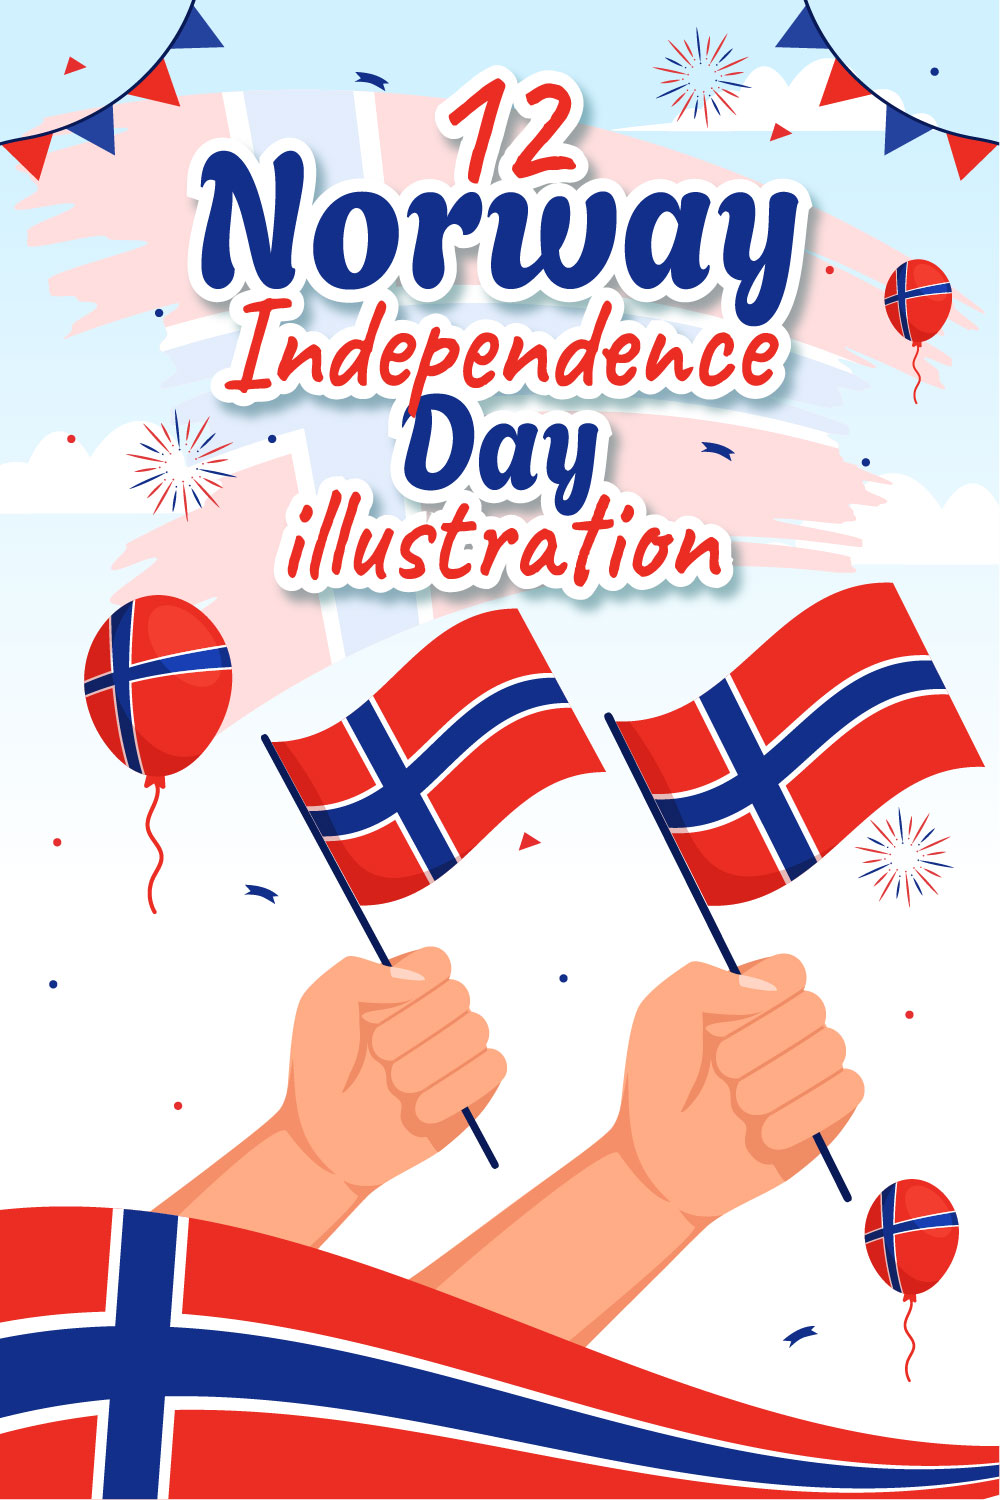 12 Norway Independence Day Illustration pinterest preview image.